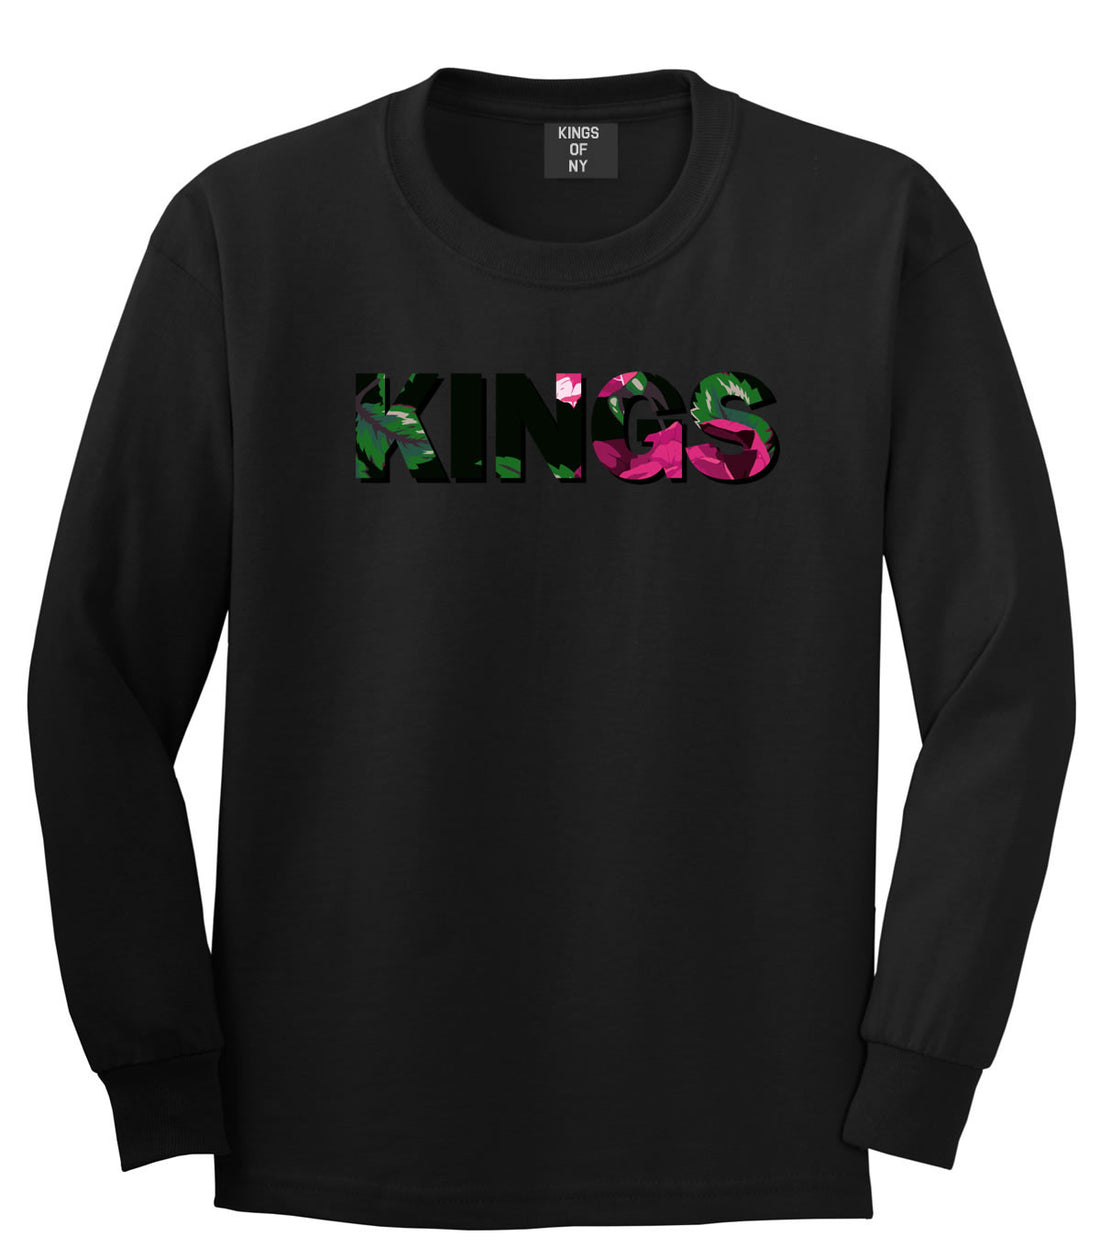 Kings Floral Print Pattern Long Sleeve T-Shirt in Black by Kings Of NY